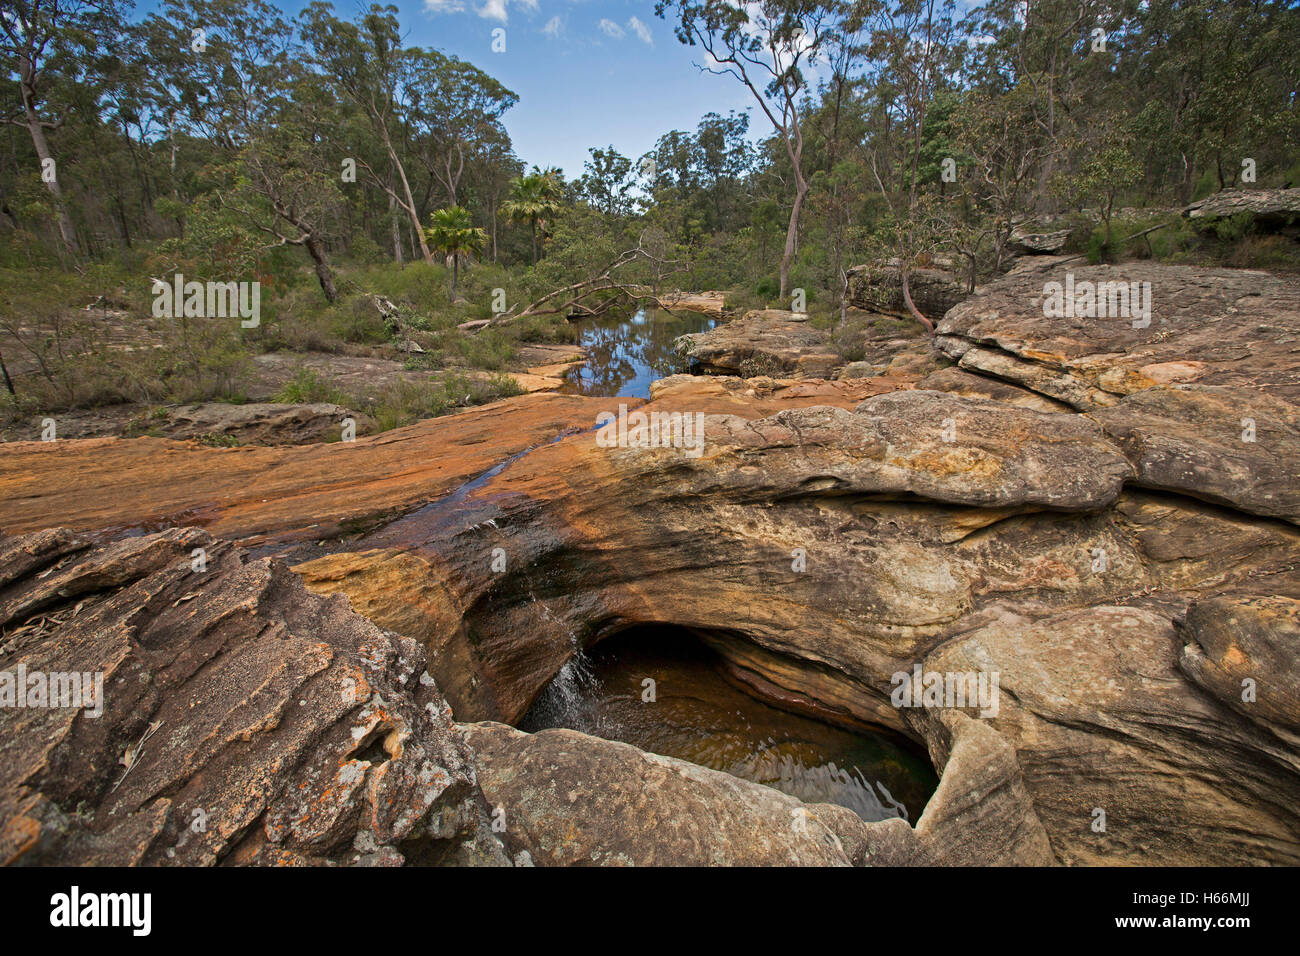 Landscape dominated by deep holes eroded in red sandstone rock, water trickling in from stream & bordered by forest & boulders Stock Photo